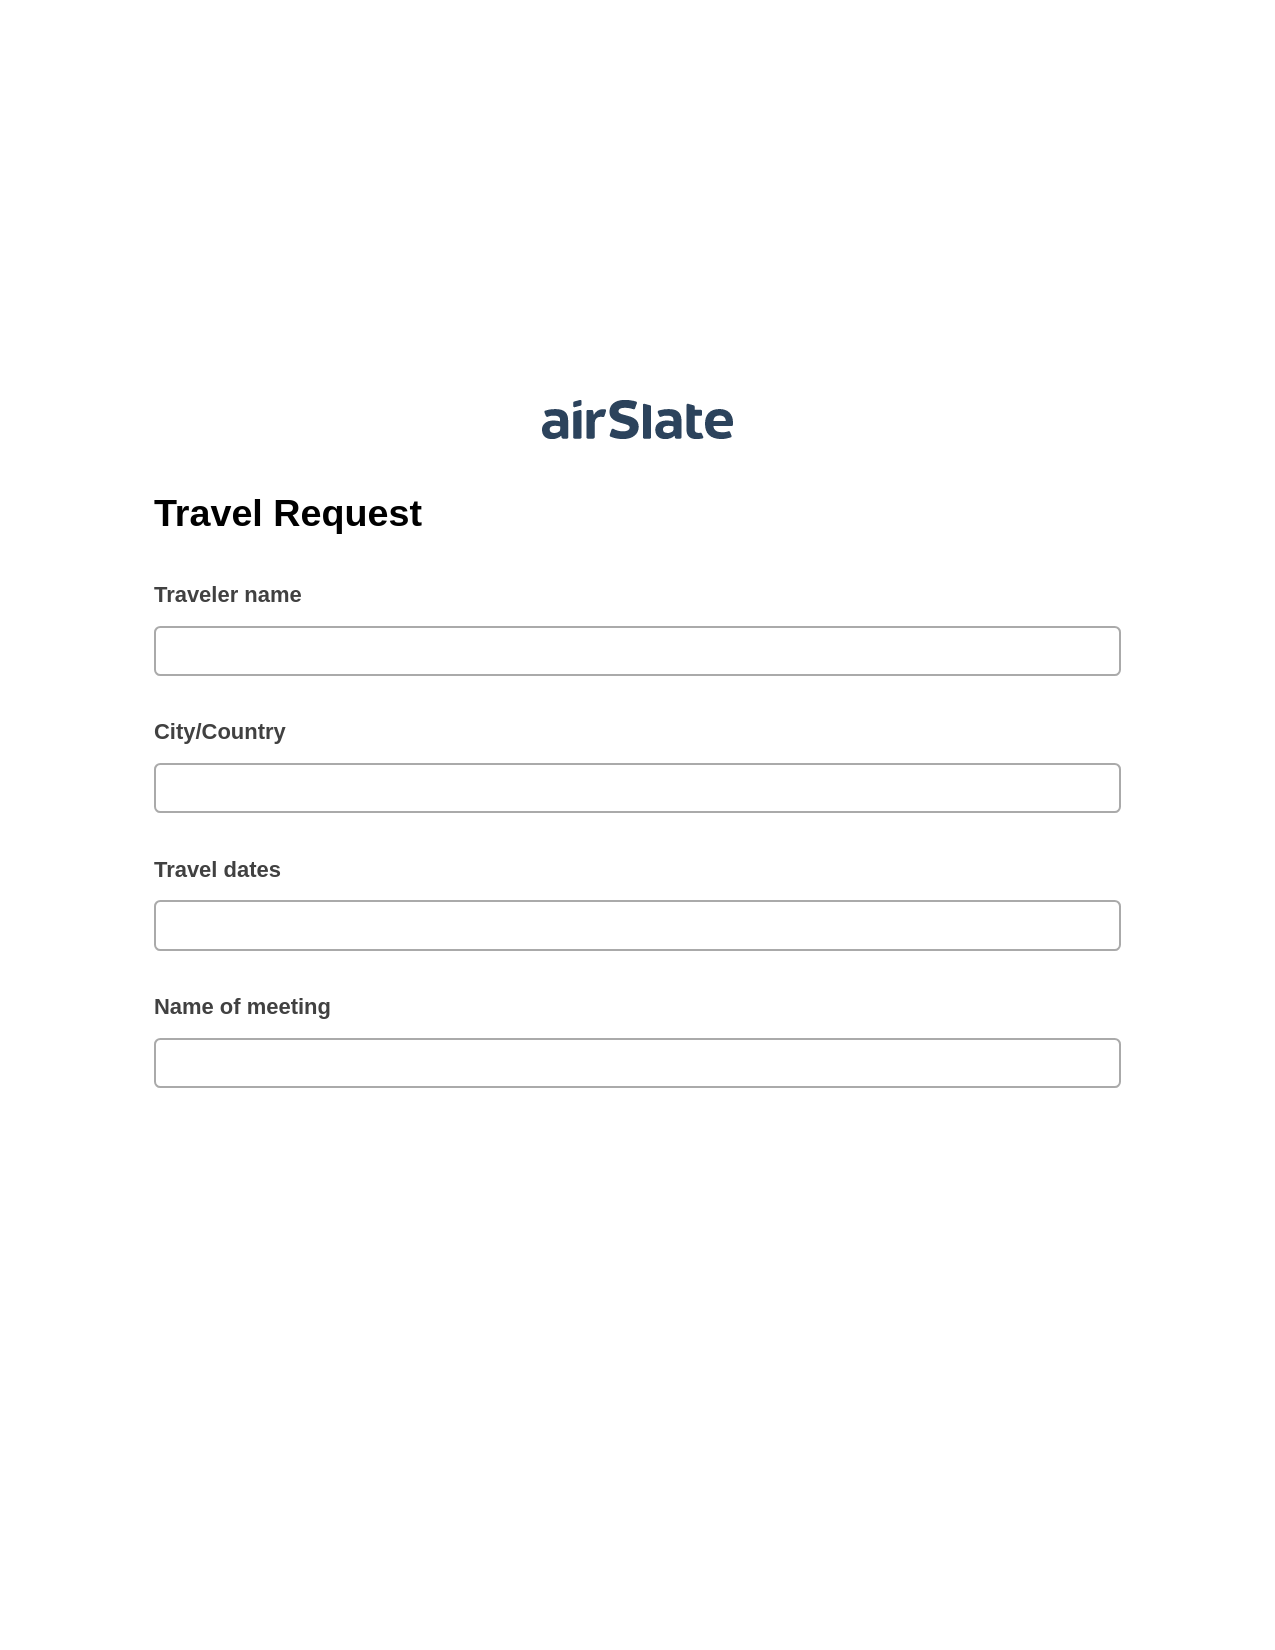 Travel Request Pre-fill from Smartsheet Bot, Email Notification Bot, Archive to SharePoint Folder Bot